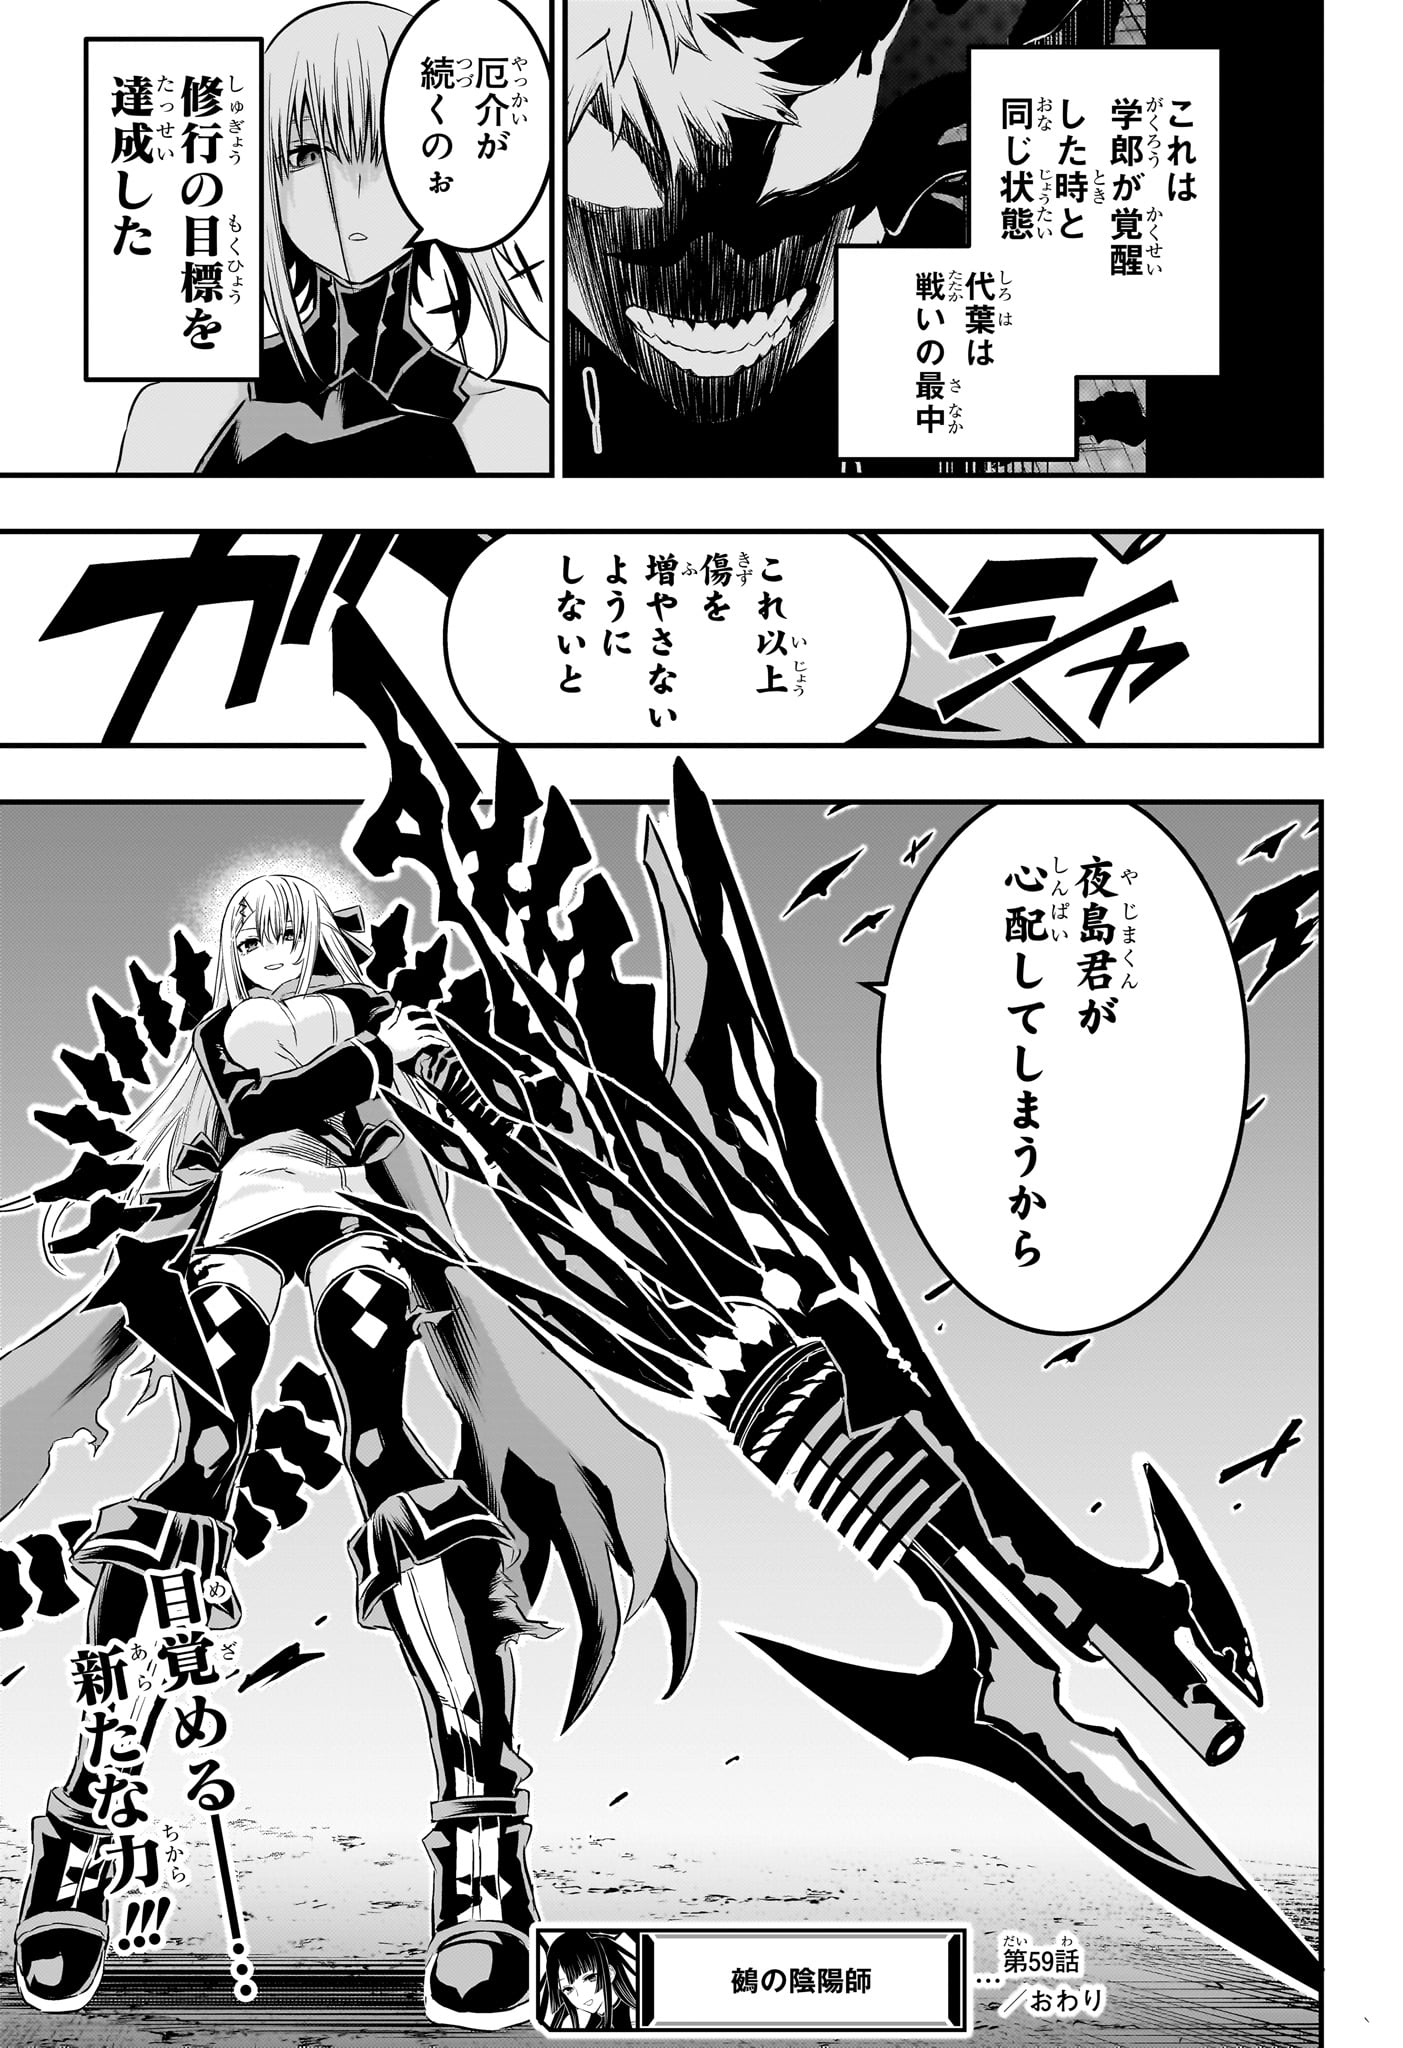 Nue no Onmyouji - Chapter 59 - Page 19